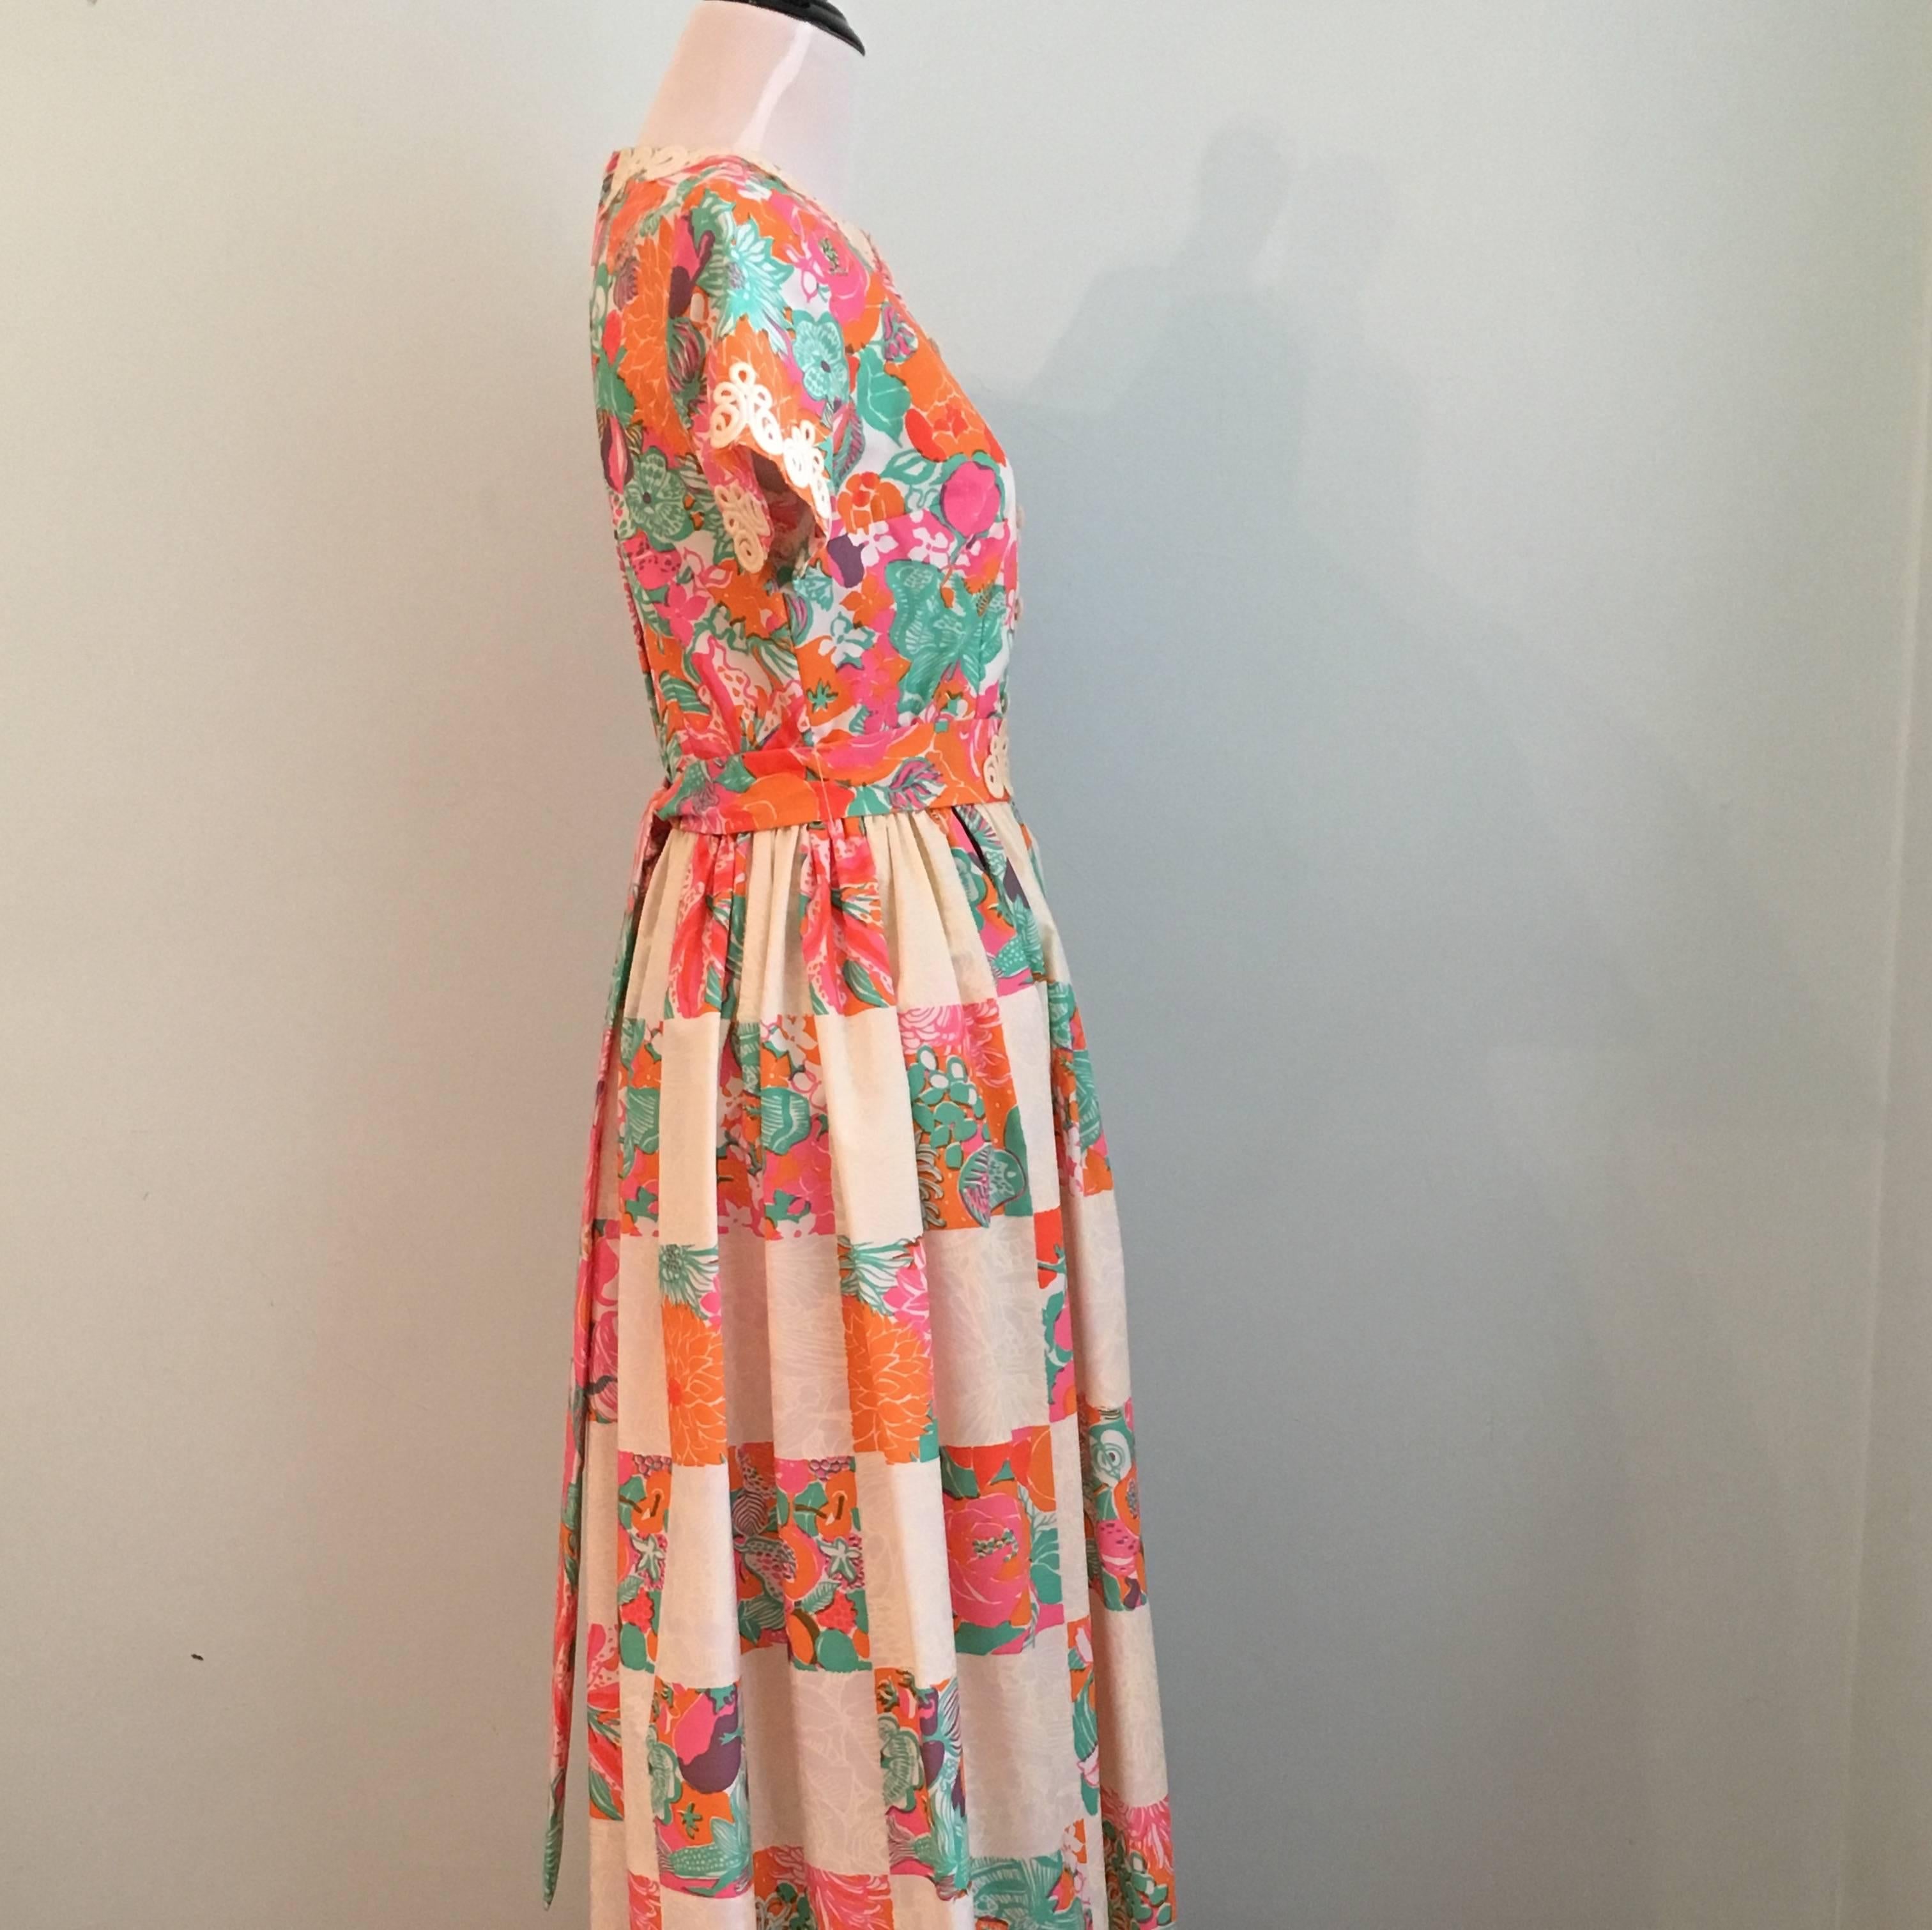 This wonderful Lilly Pulitzer dress dates to the mid 1960s. The bodice is made up of a pink, orange, green and white colored fruit, floral and butterfly print. The skirt is made up of a patchwork printed fabric. There is a size tag on the dress that